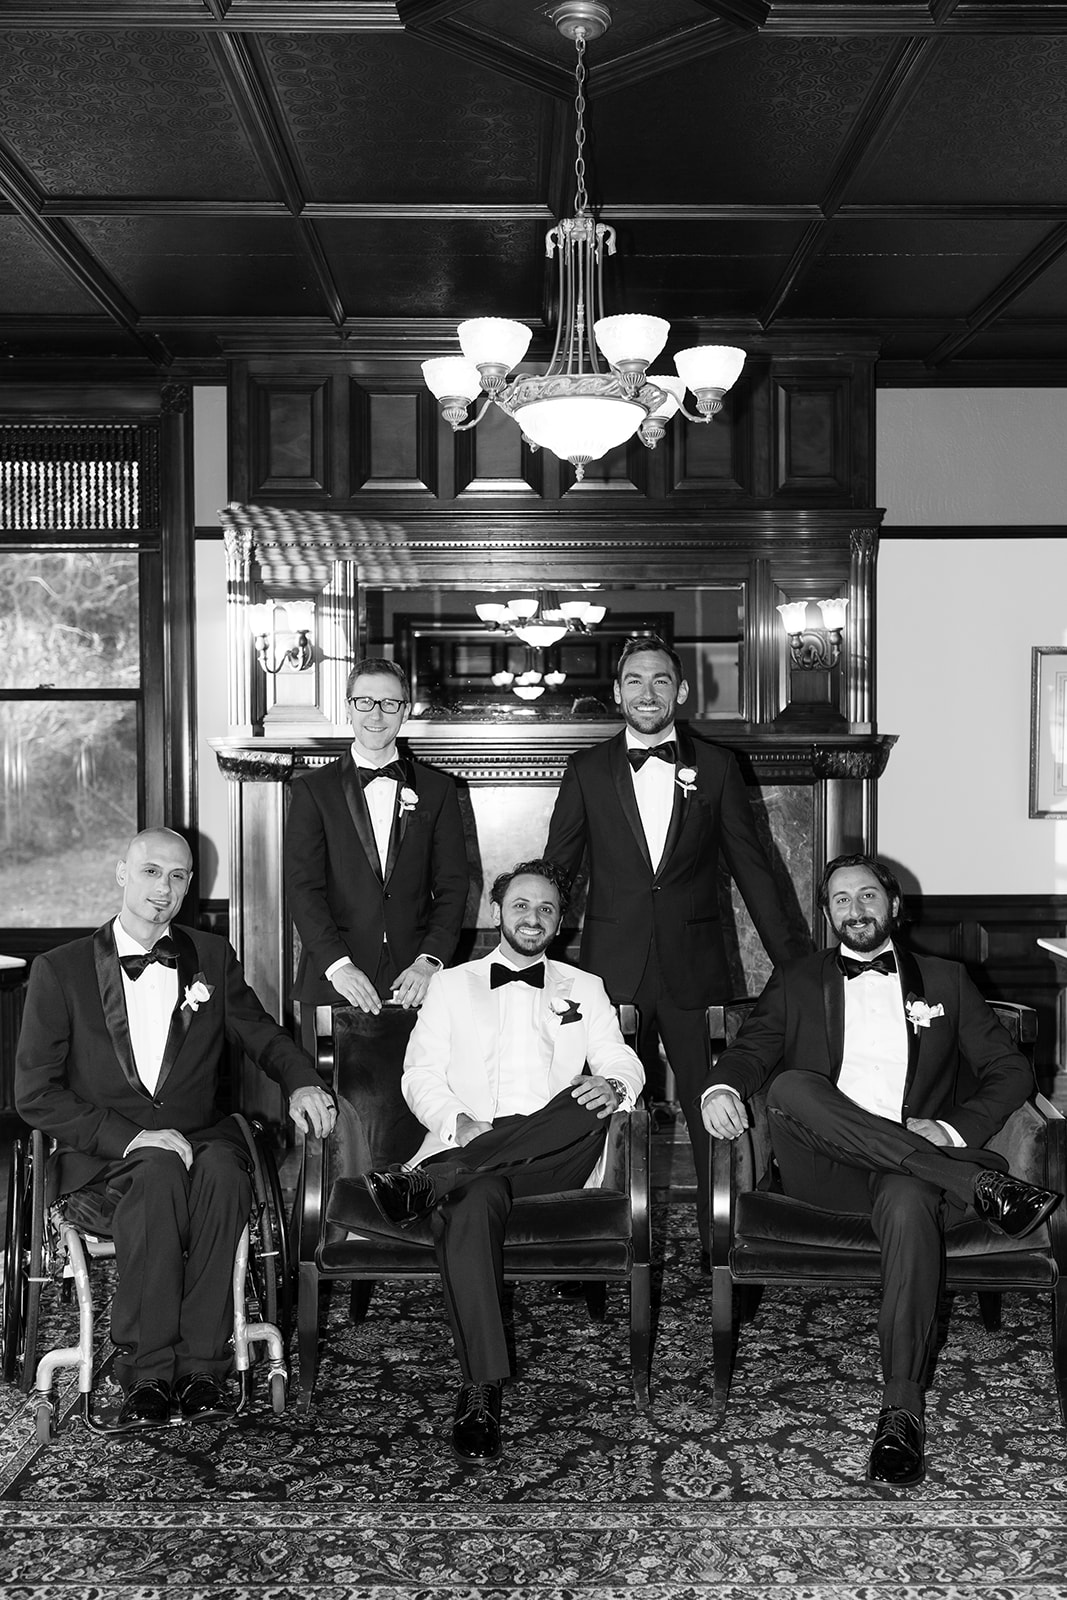 Groomsmen pose together before the dreamy wedding day